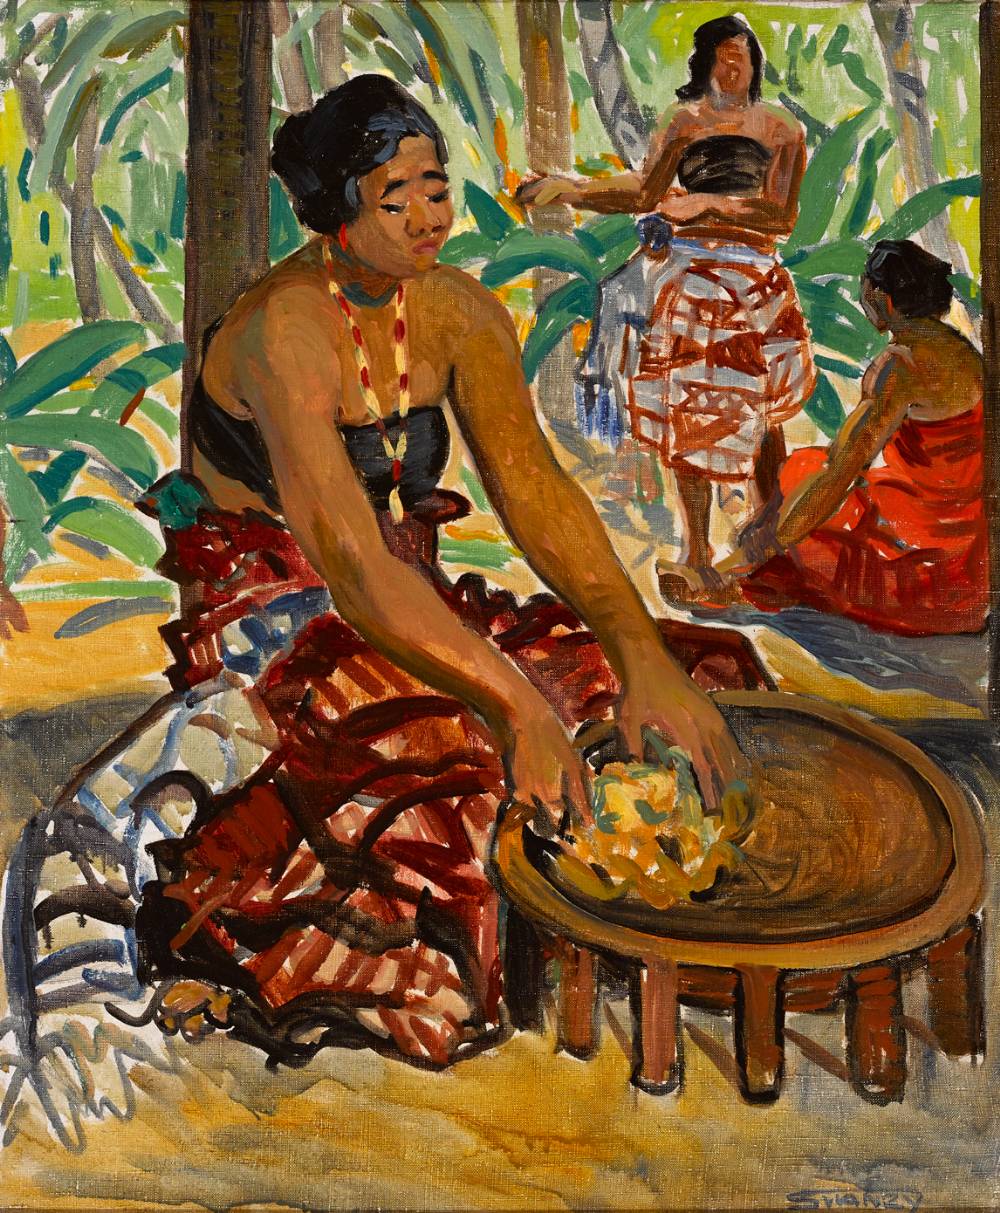 PREPARING THE MEAL, SAMOA, c. 1919-25 by Mary Swanzy sold for €48,000 at Whyte's Auctions